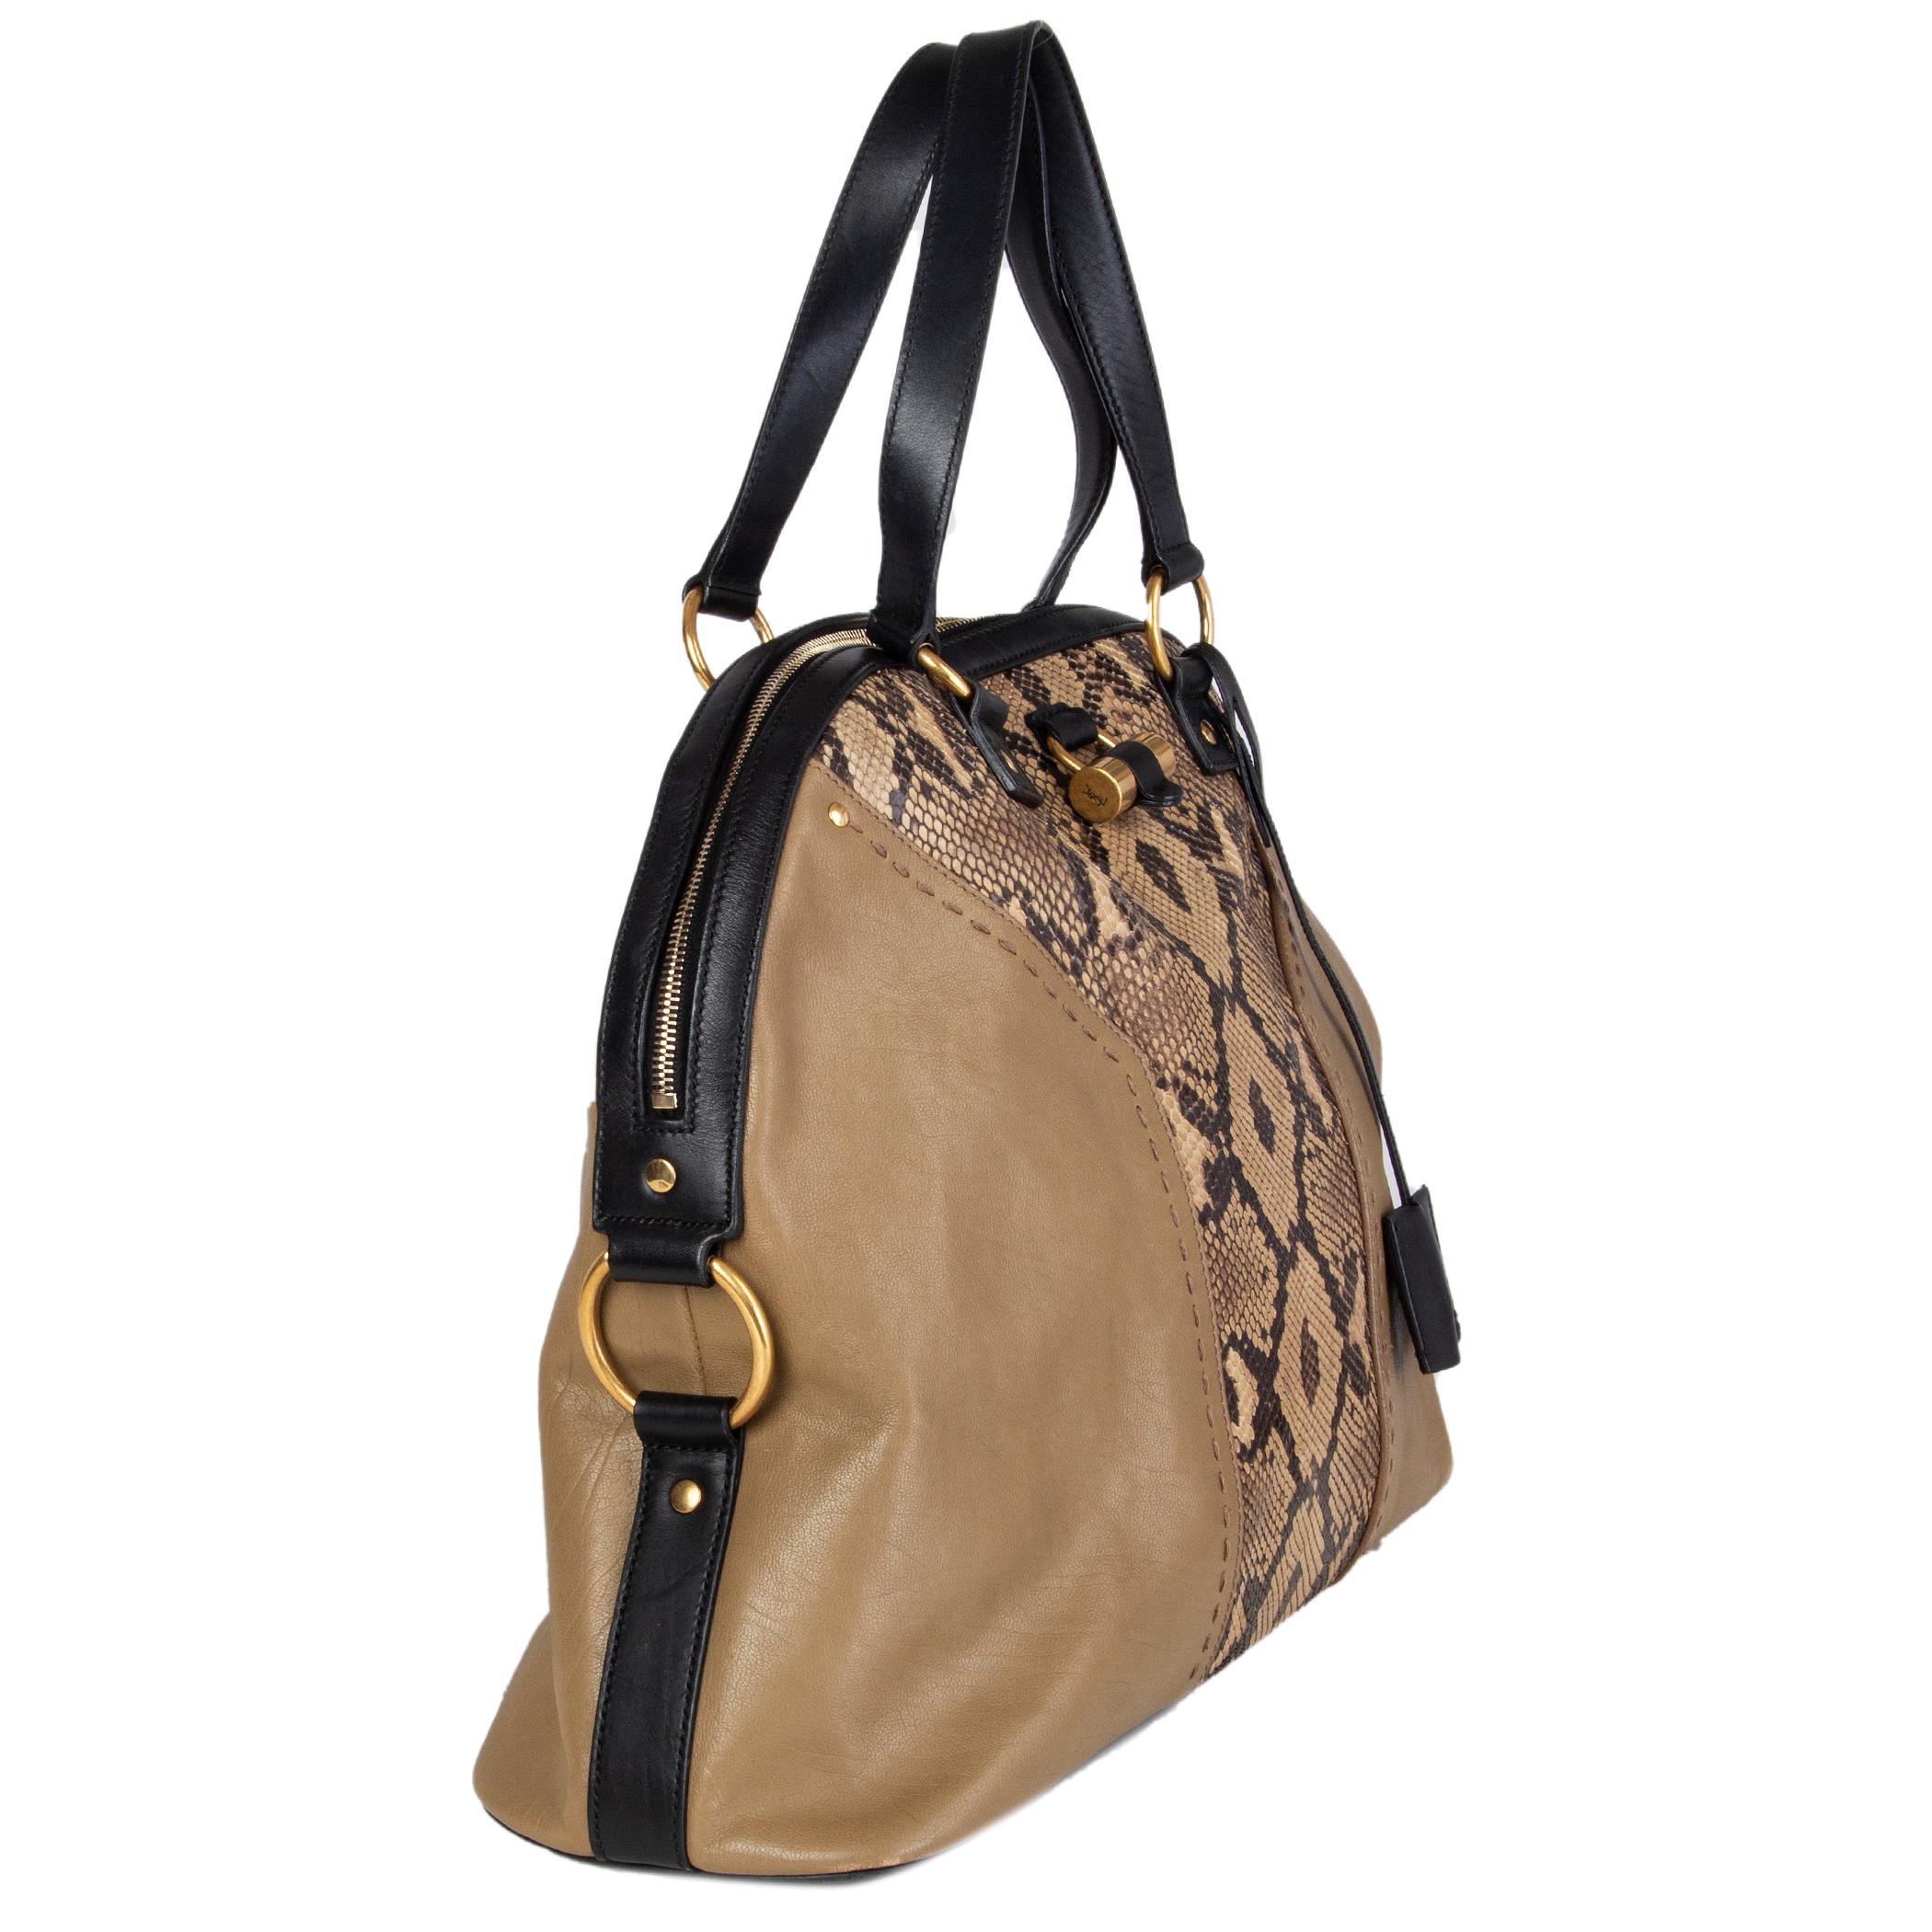 Yves Saint Laurent 'Muse Large' bag in taupe and dark brown snakeskin and khaki calfskin with black leather trimmings. Opens with a zipper on top and is lined in black canvas with one zip pocket against the back and two open pockets against the